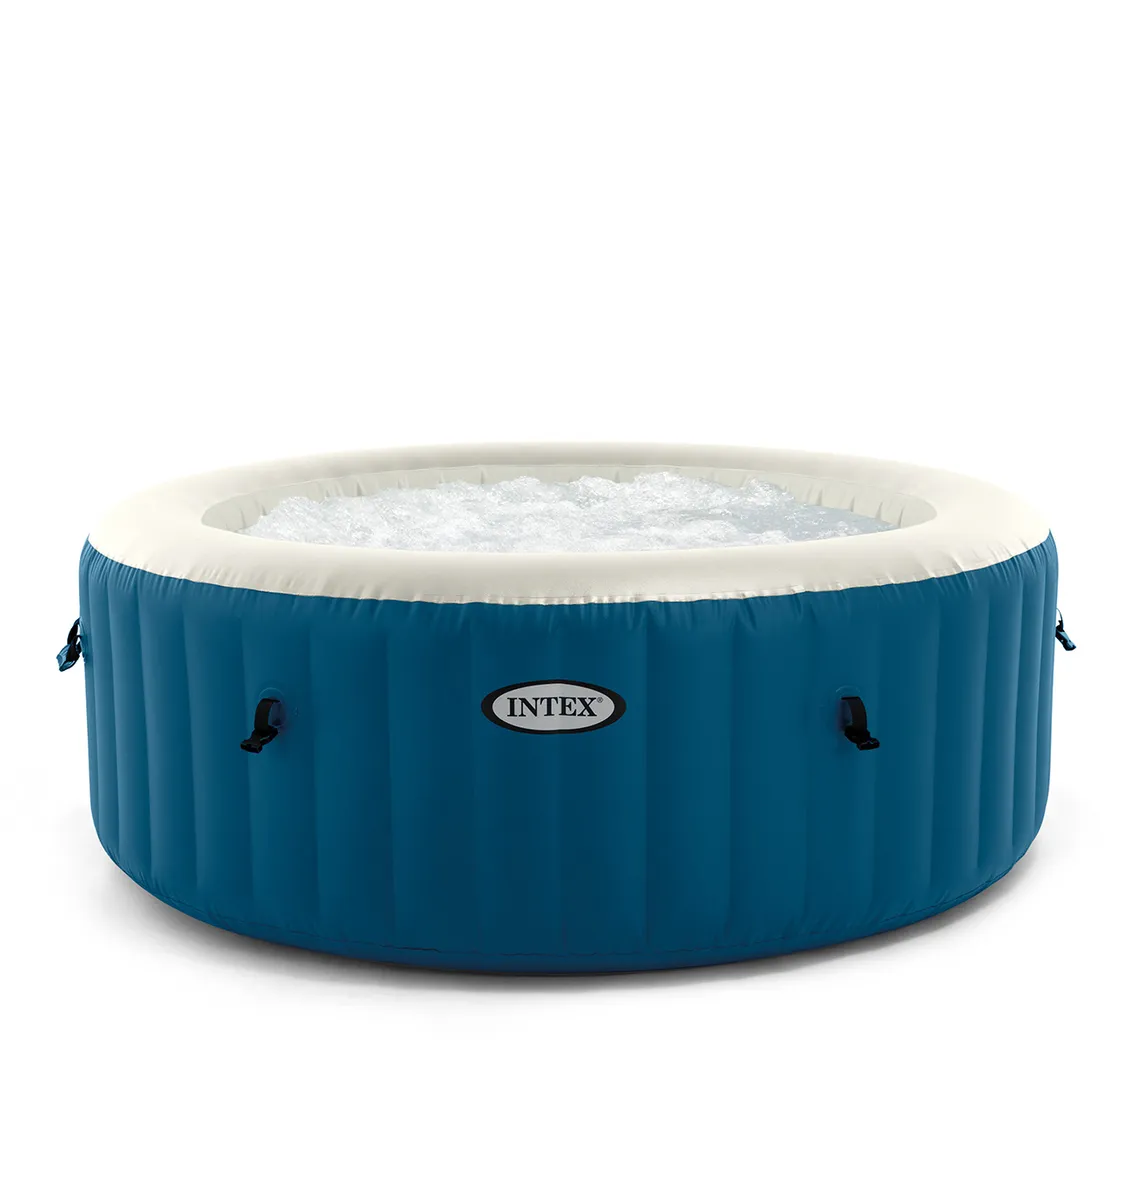 SPA GONFLABLE INTEX PURESPA BLUE ONE 4pl